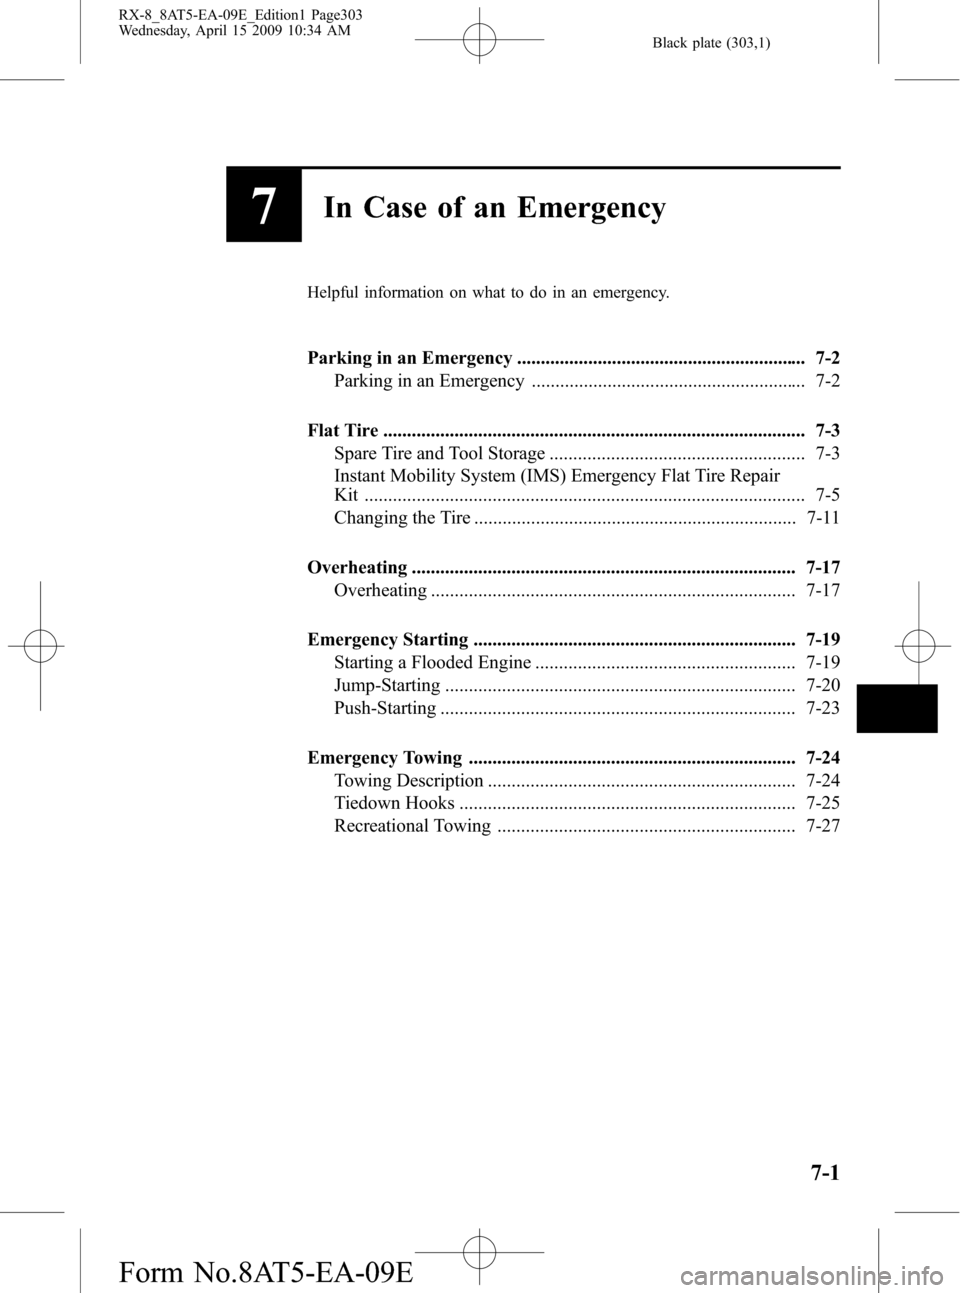 MAZDA MODEL RX 8 2010  Owners Manual (in English) Black plate (303,1)
7In Case of an Emergency
Helpful information on what to do in an emergency.
Parking in an Emergency ............................................................. 7-2
Parking in an 